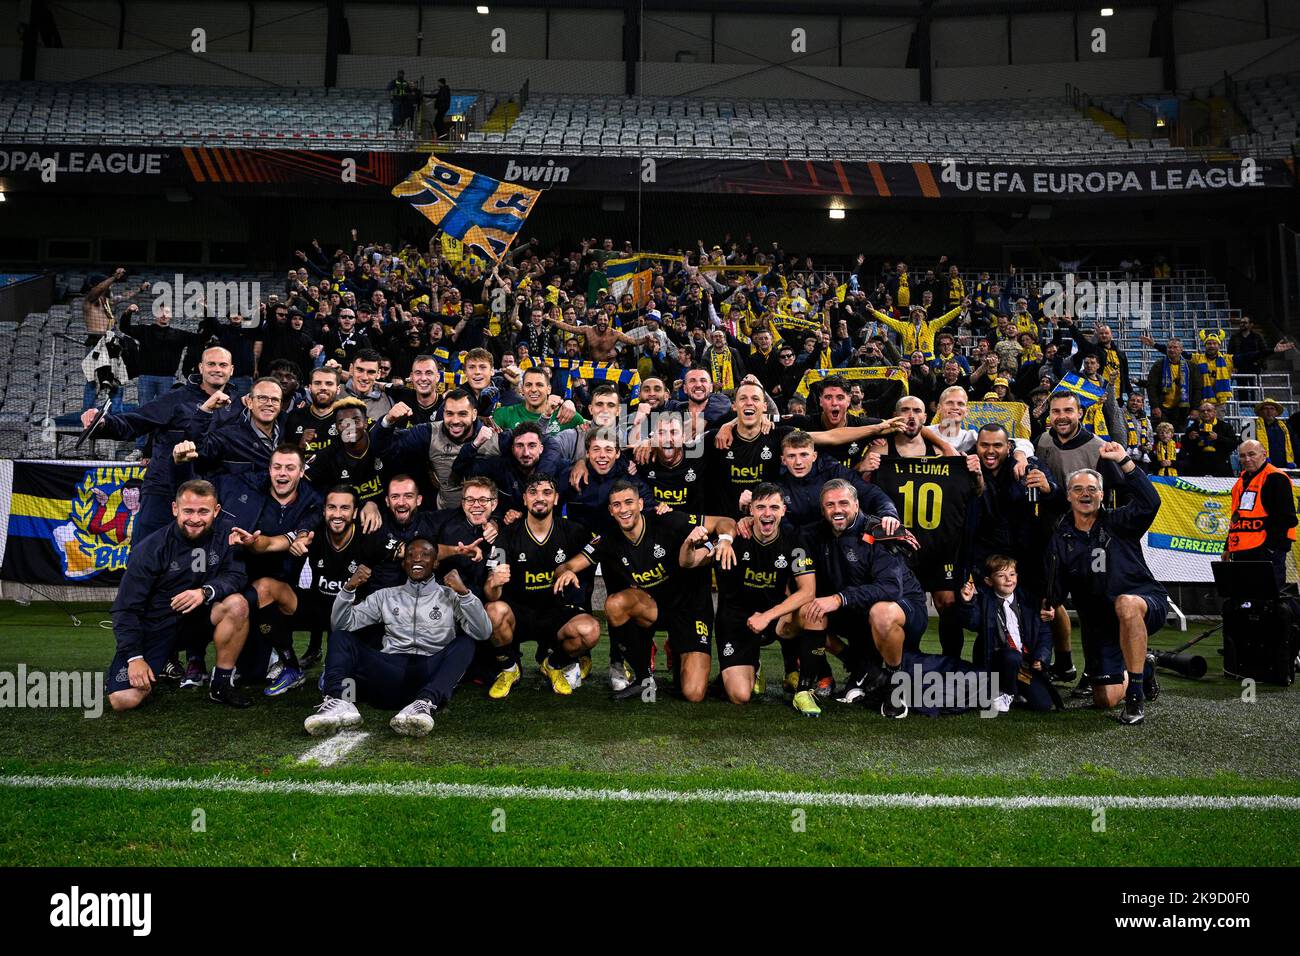 Union's players celebrate after winning a soccer game between Swedish Malmo Fotbollforening and Belgian Royale Union Saint-Gilloise, Thursday 27 October 2022 in Malmo, on day 5 of the UEFA Europa League group stage. BELGA PHOTO LAURIE DIEFFEMBACQ Credit: Belga News Agency/Alamy Live News Stock Photo